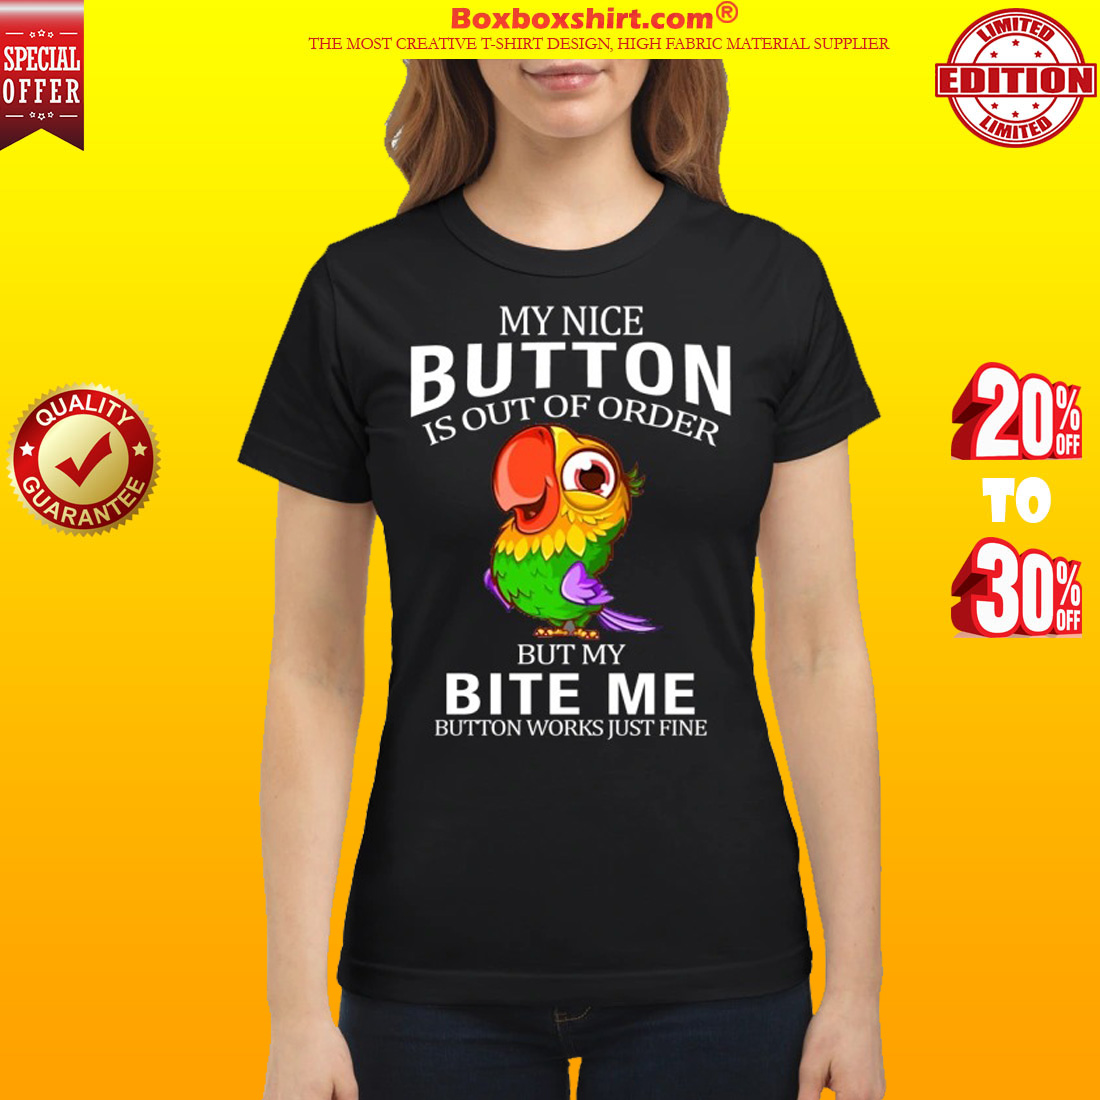 Parrot my nice button is out of order but my bite me button works just fine classic shirt